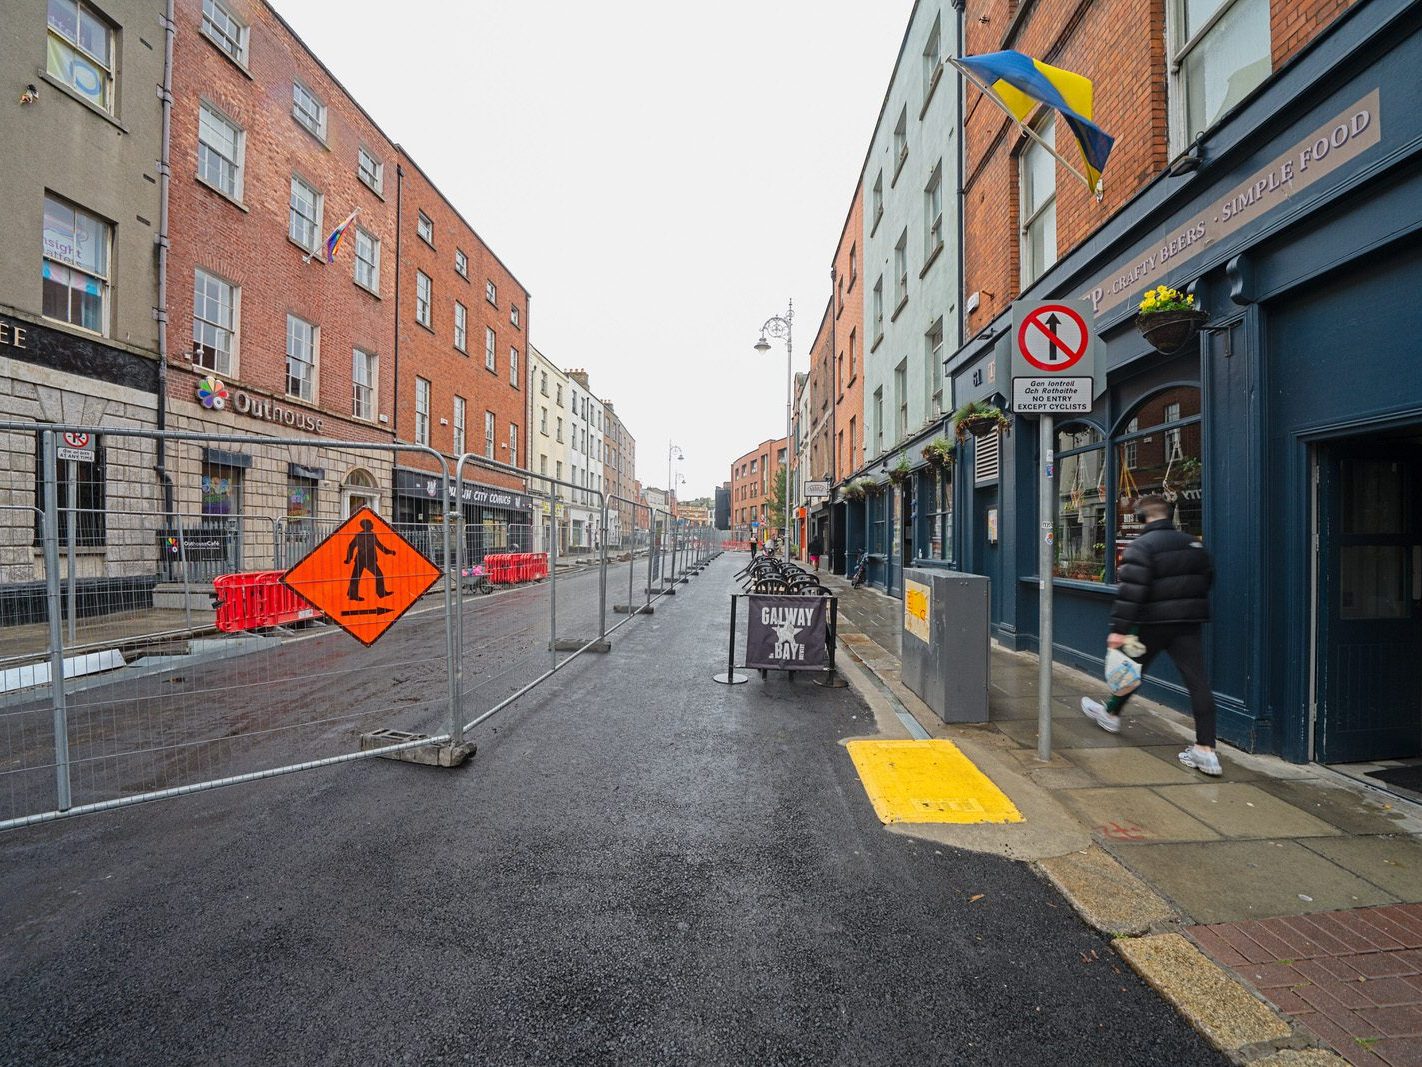 CAPEL STREET ON A DULL WET DAY [INTERIM CAPEL STREET IMPROVEMENT WORKS ARE NOW ONGOING] 035